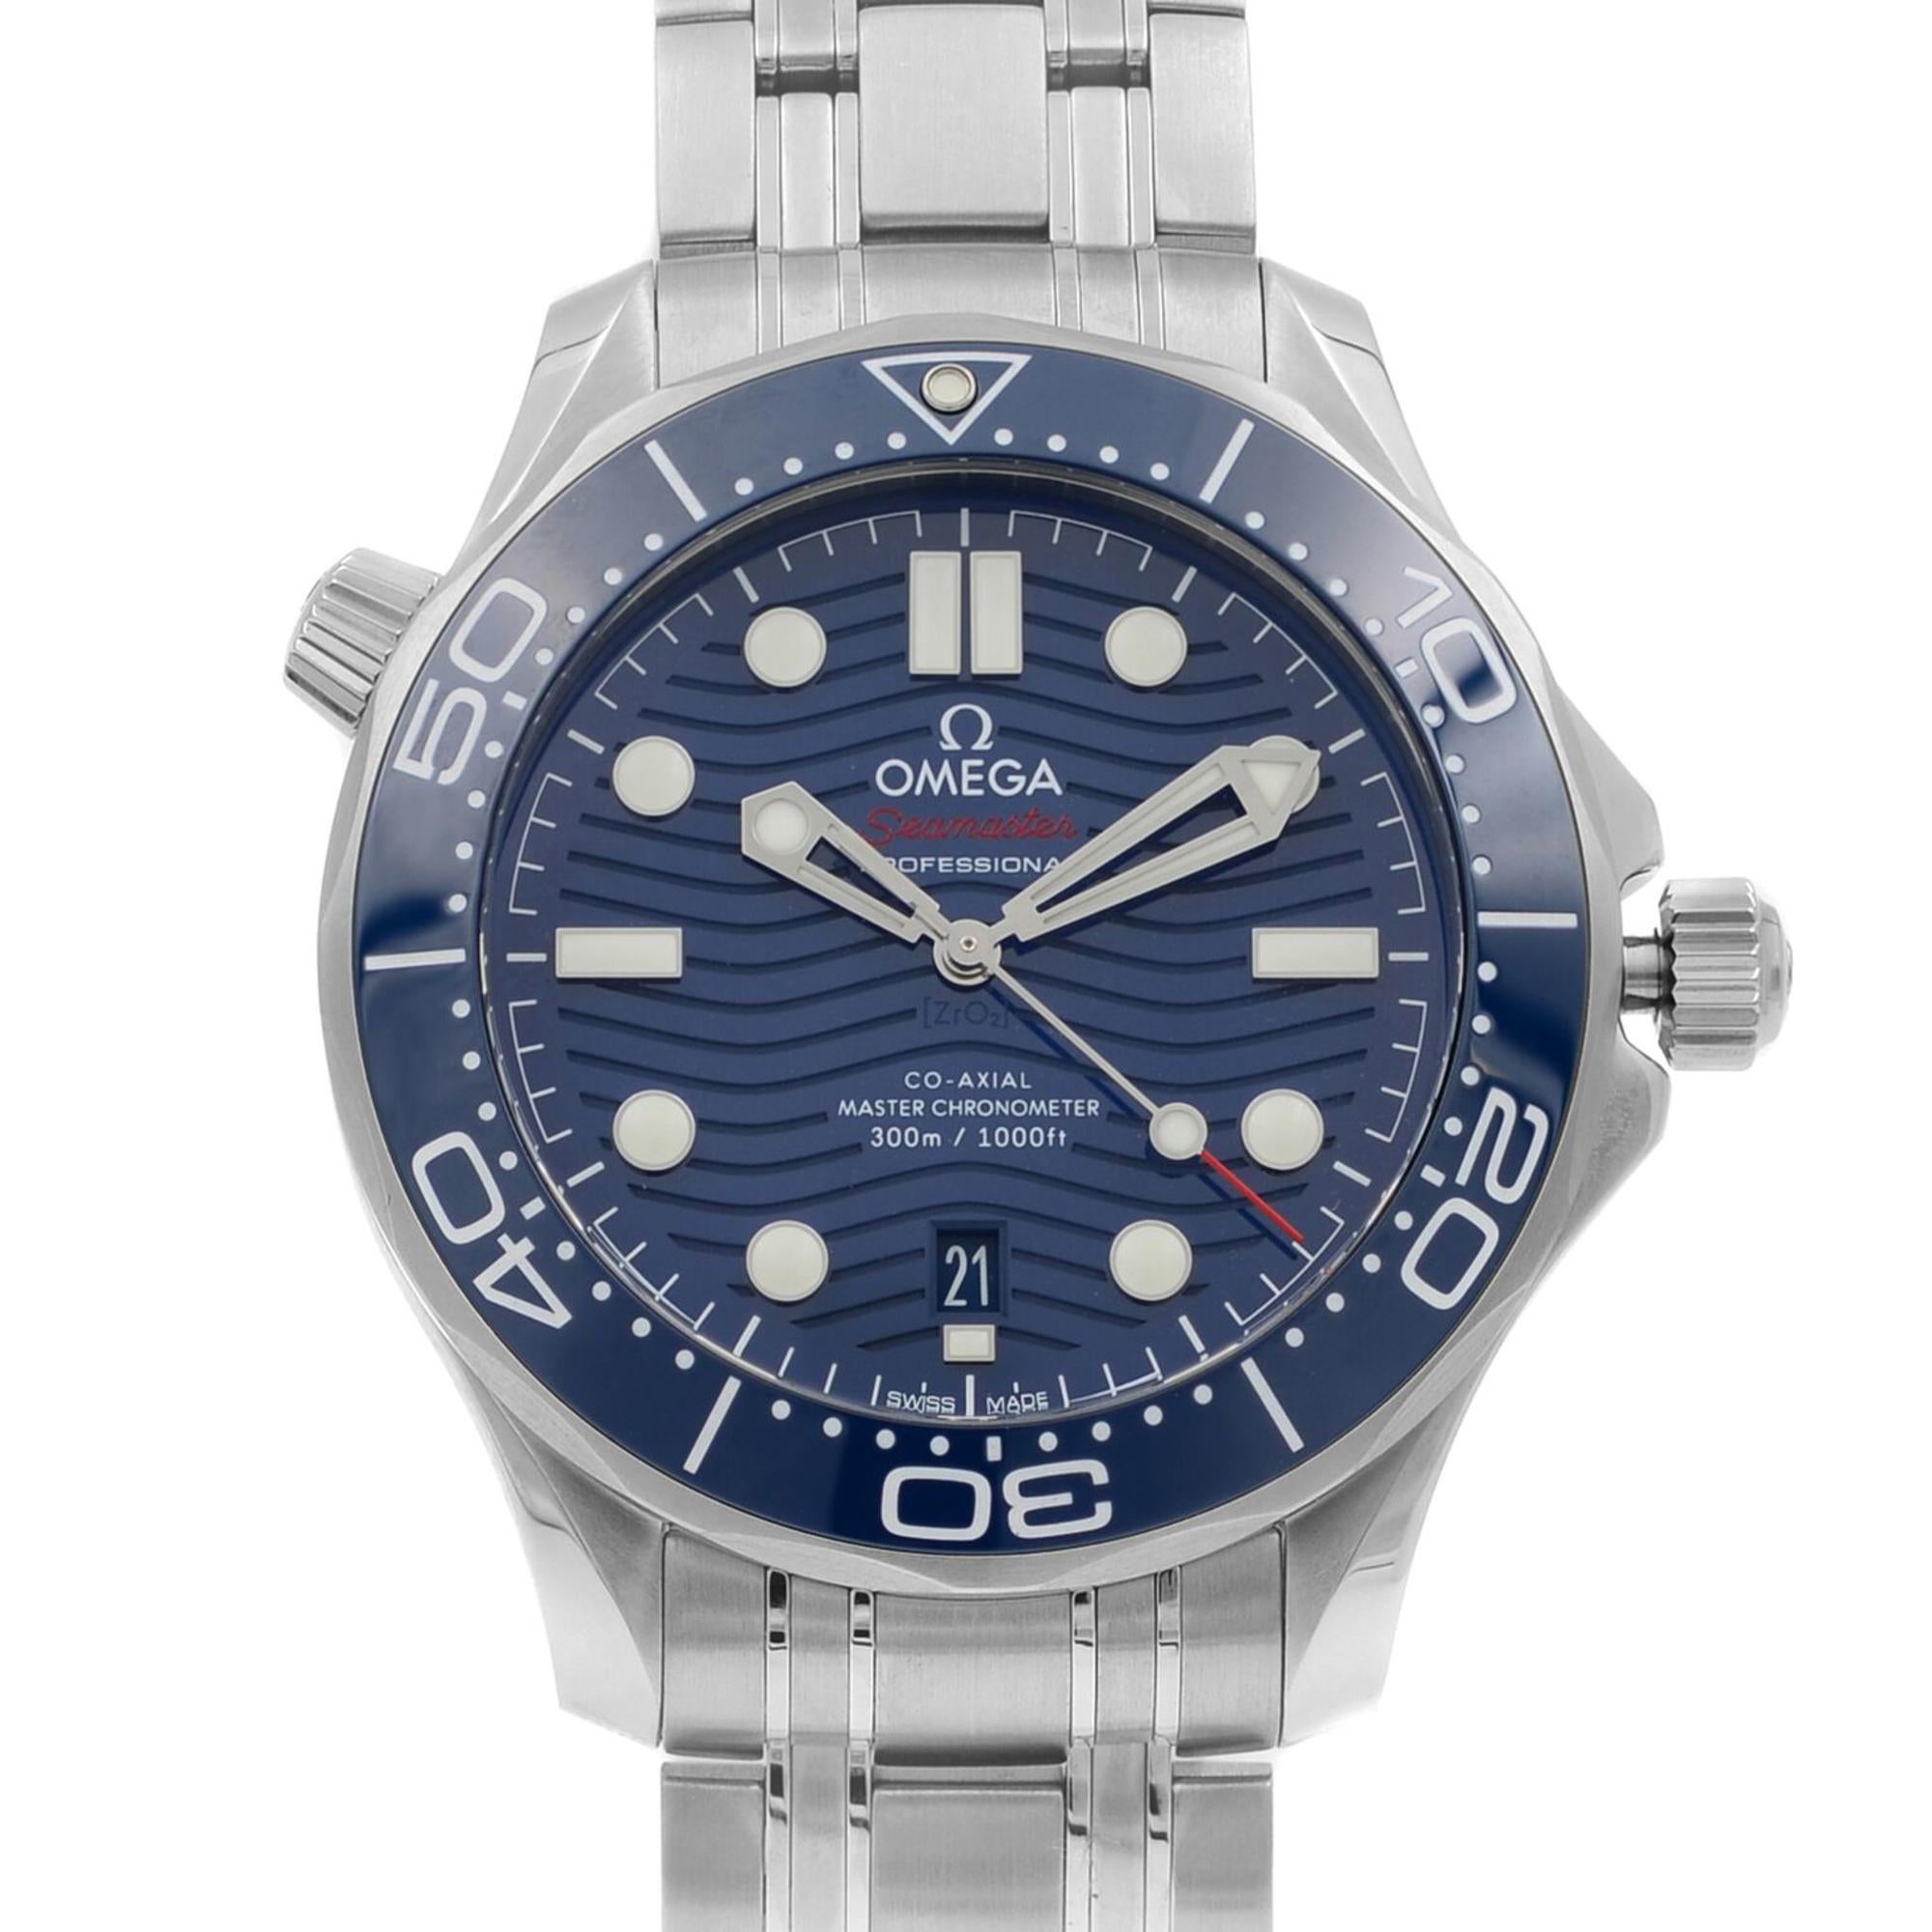 Unworn Omega Seamaster Diver 300M Steel Blue Dial Men's Watch 210.30.42.20.03.001. This Beautiful Timepiece is Powered by an Automatic Movement and Features: Stainless Steel case and Bracelet that Closes with a Double Push Button Fold Over Clasp,